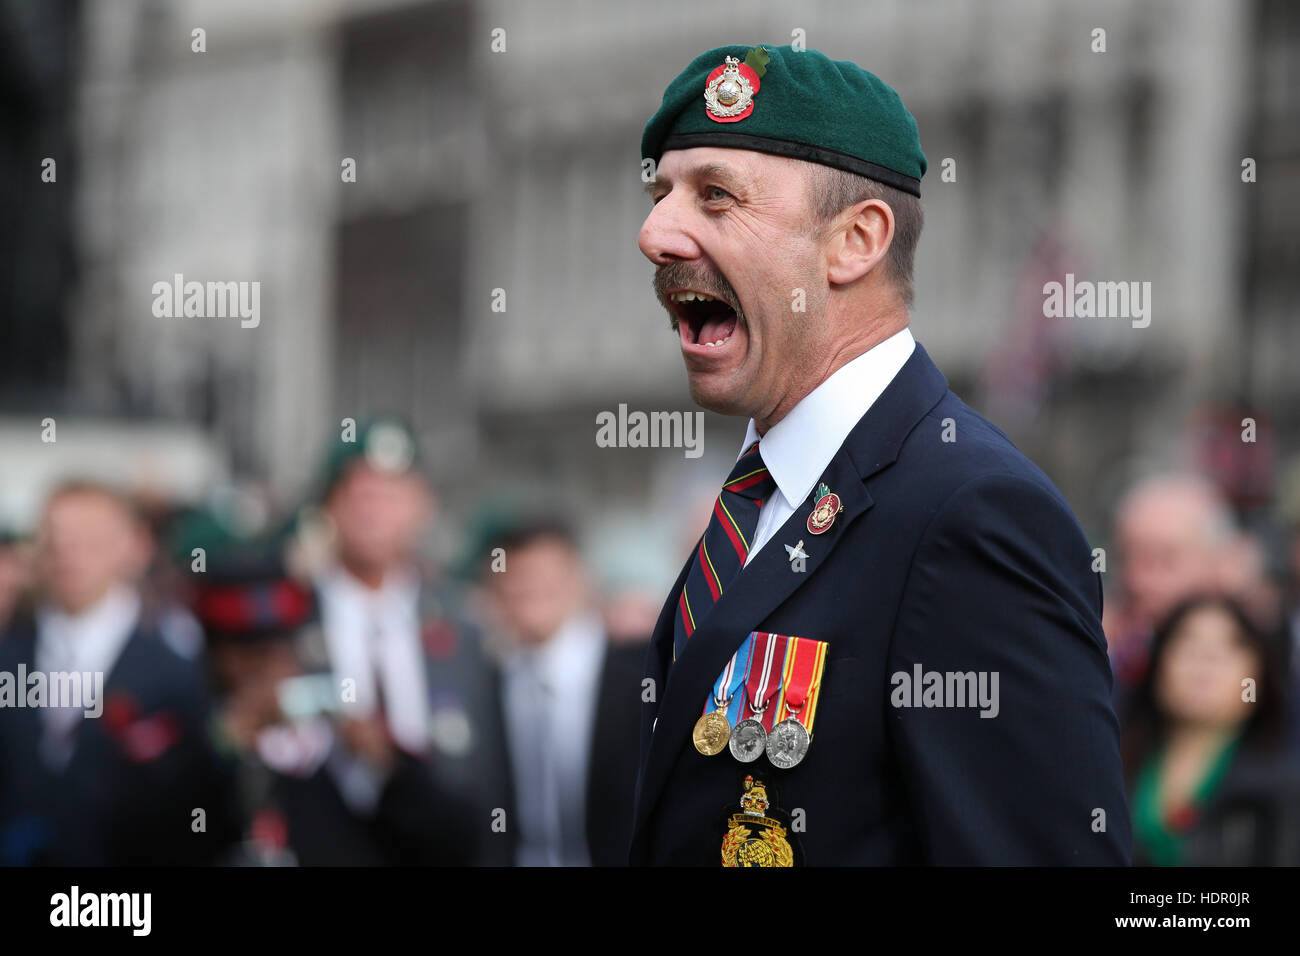 Former and serving members of the armed forces take part in a rally in support of support of Sgt Alexander Blackman, also known as 'Marine A', who was given a life sentence after being convicted of murdering a wounded Taliban fighter.  Featuring: Leader B Stock Photo